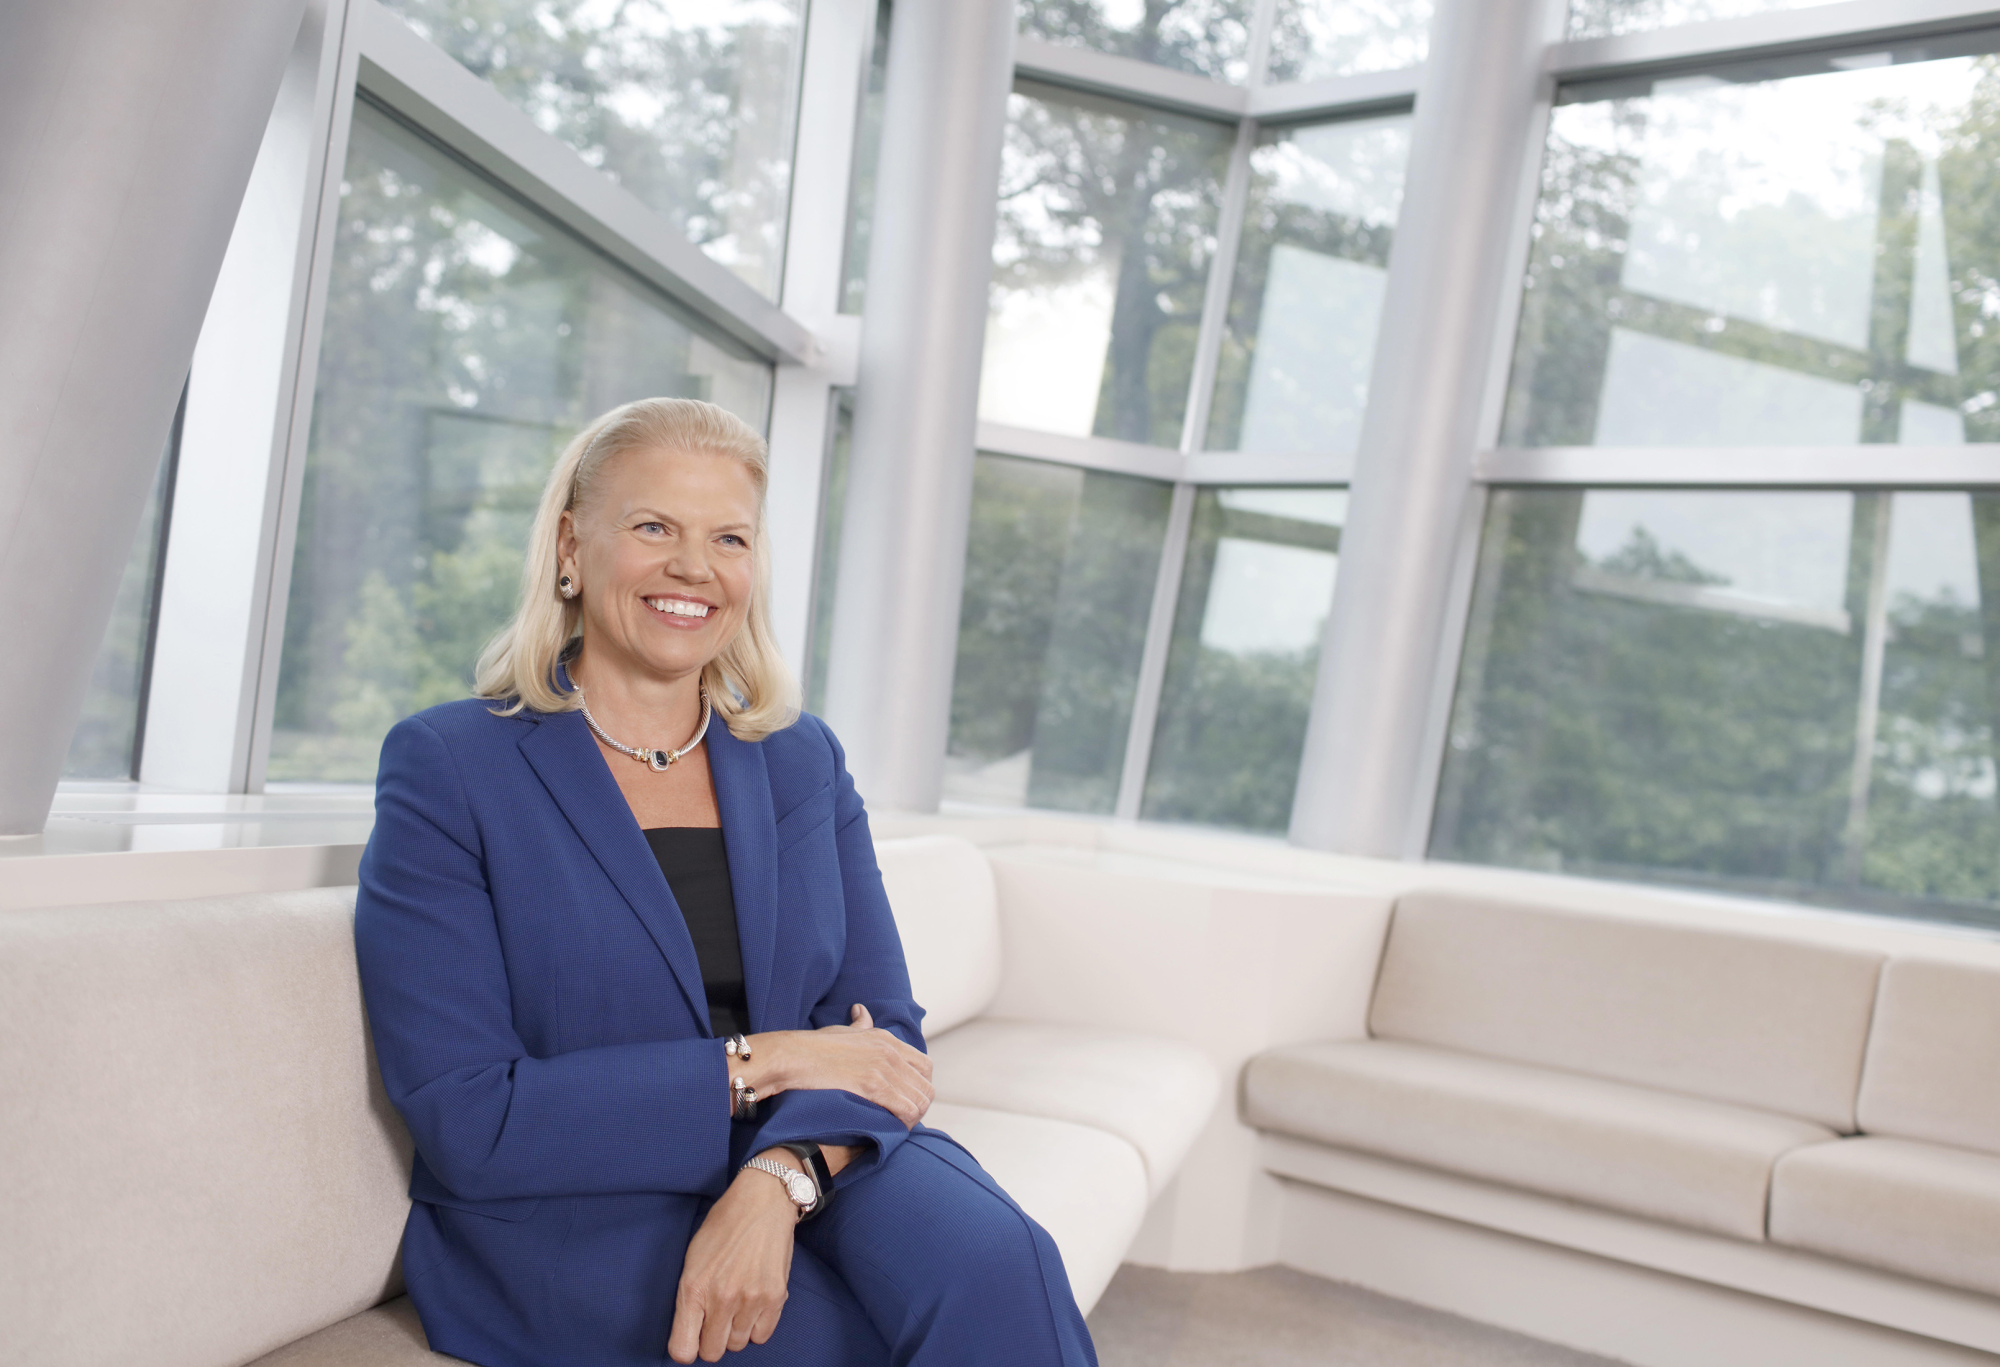 IBM Chairman, President, and Chief Executive Officer Ginni Rometty.